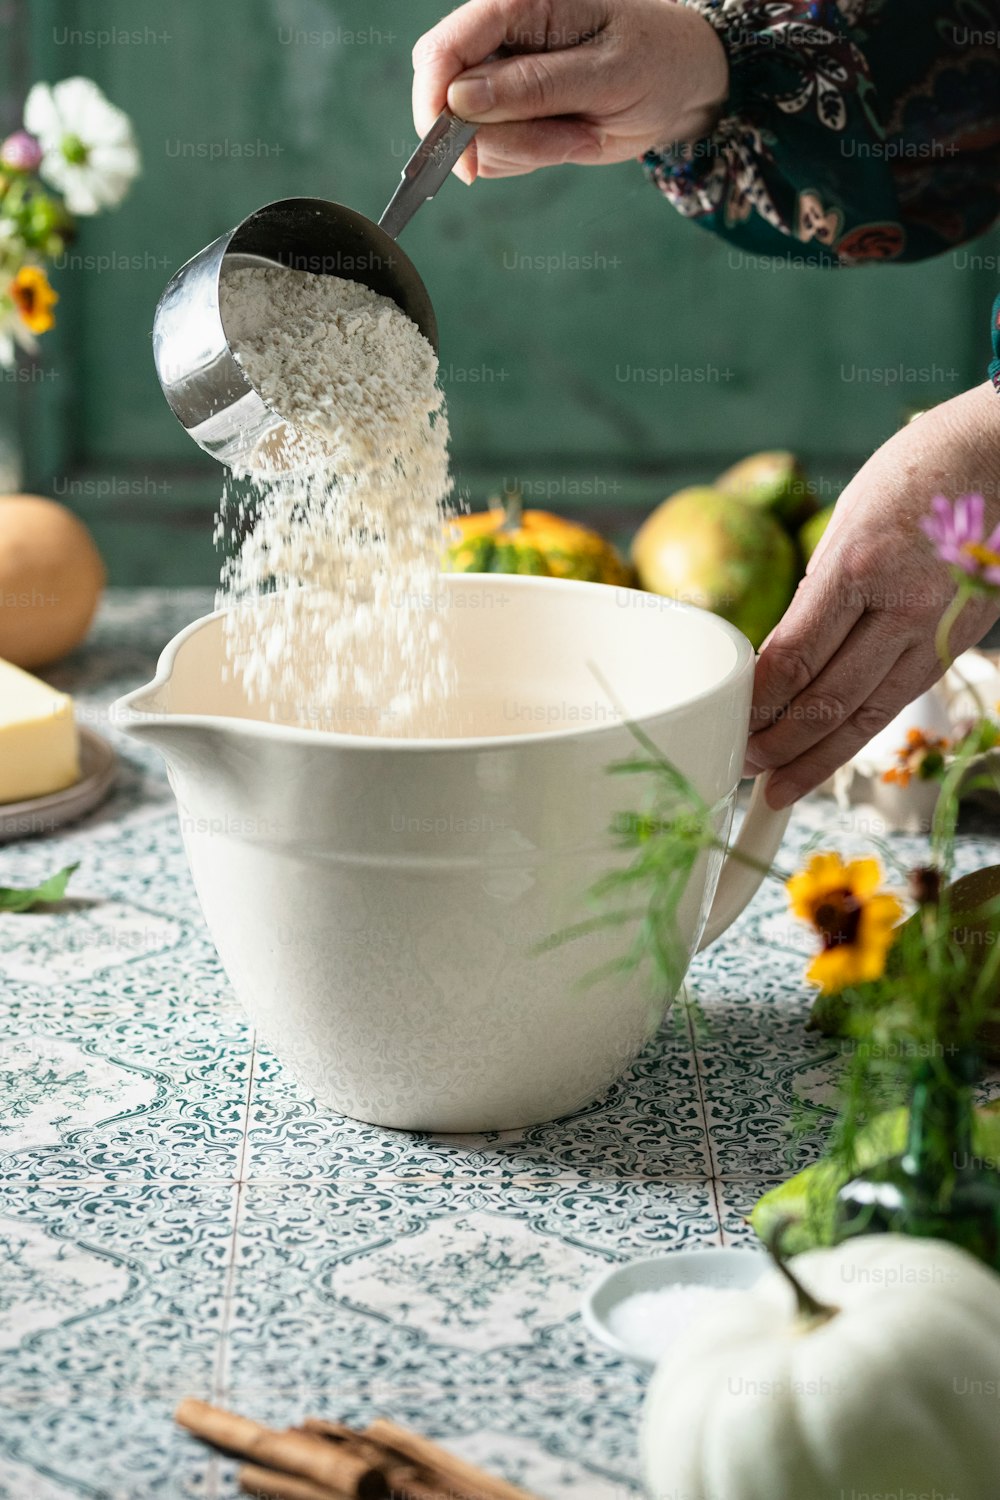 a person pouring rice into a white bowl